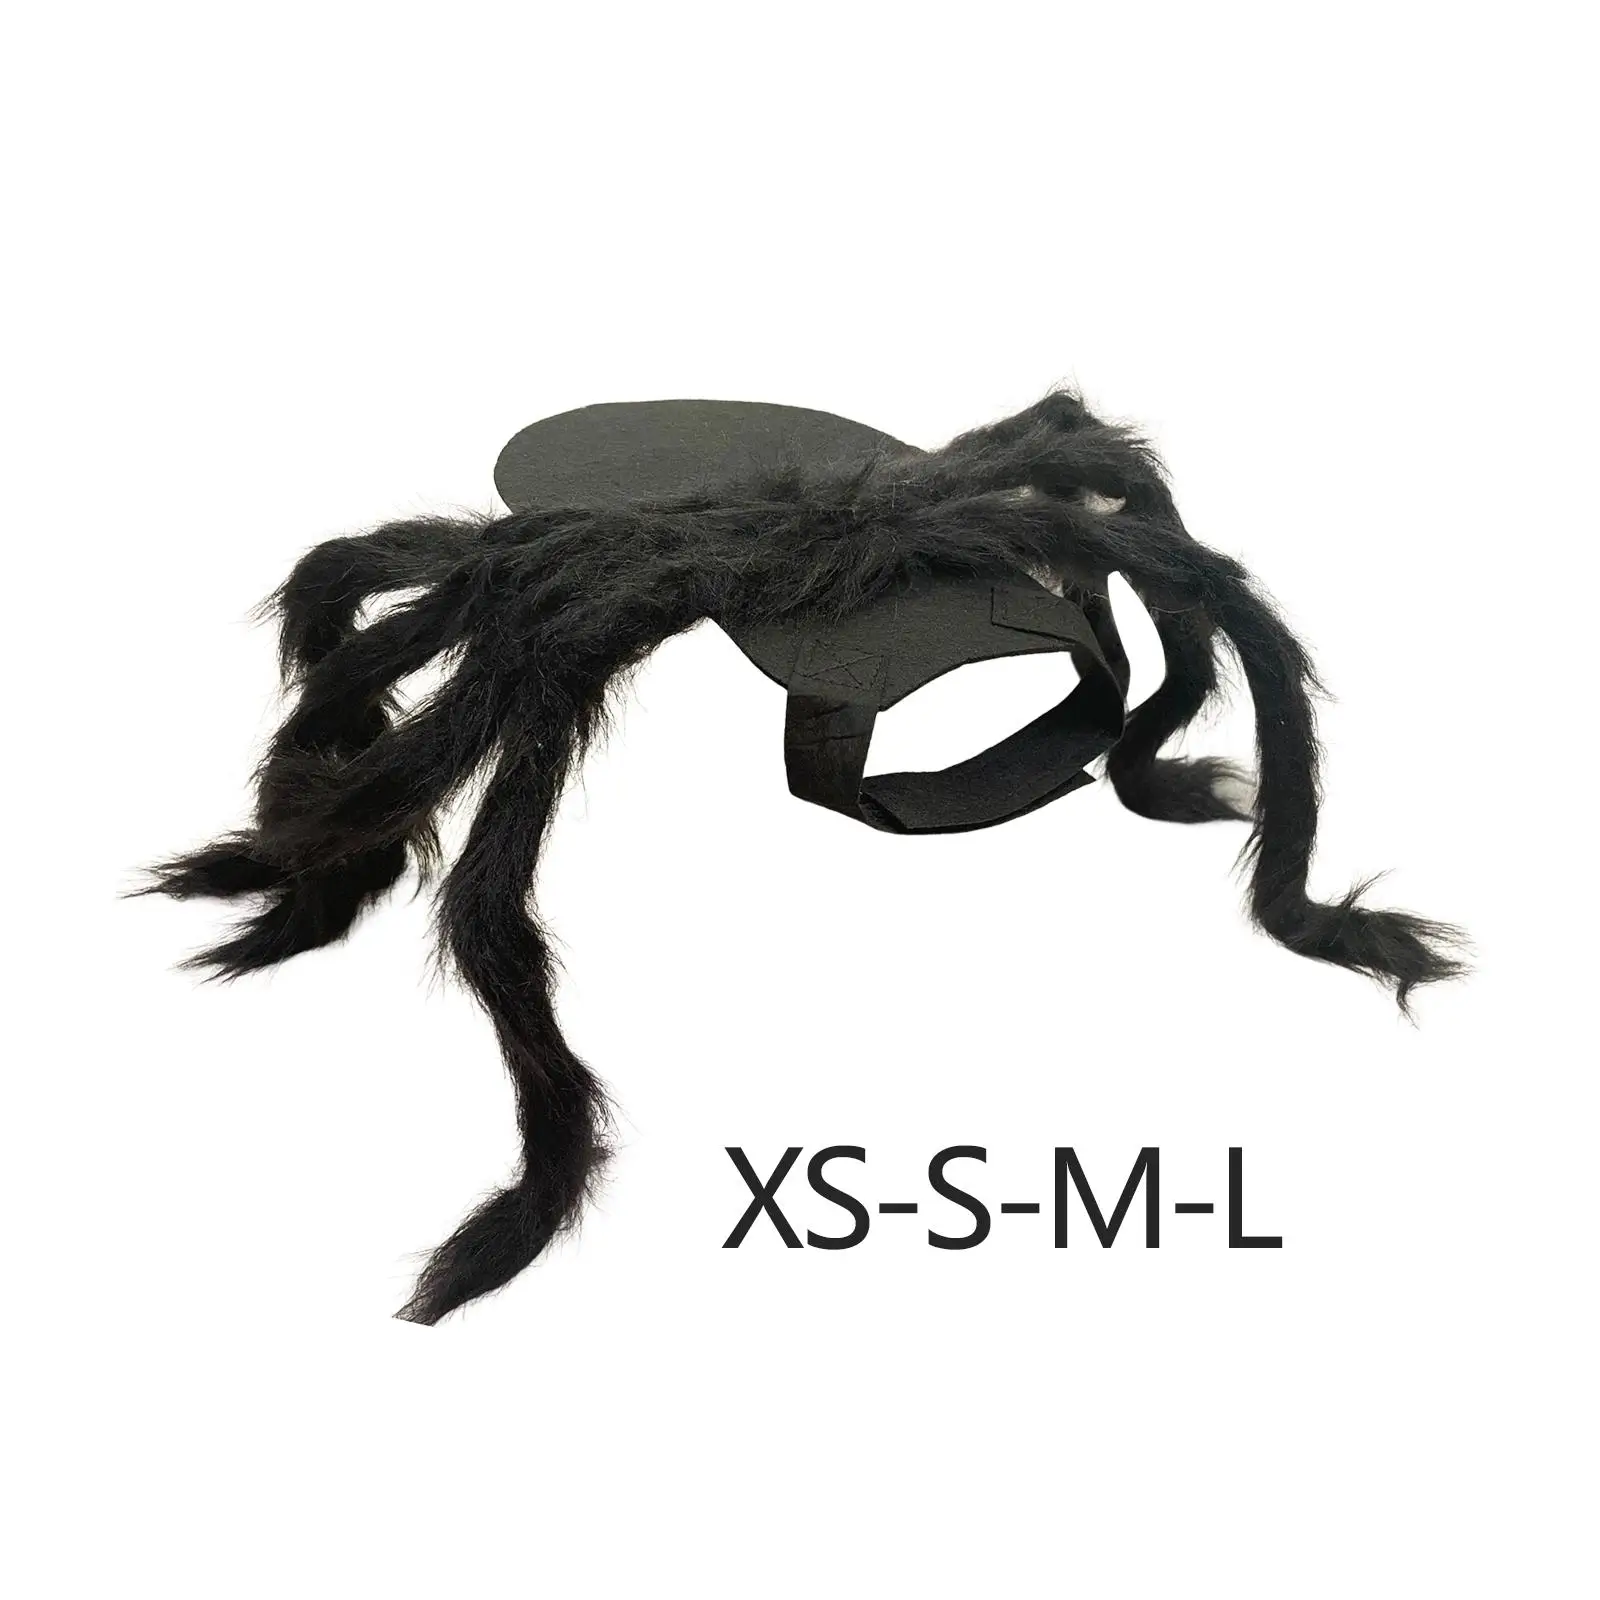 

Simulation Spider Pets Outfits Funny Costume Decoration Party Adjustable Spider Wing Cosplay Clothes for Dogs Cats Puppy Kitten